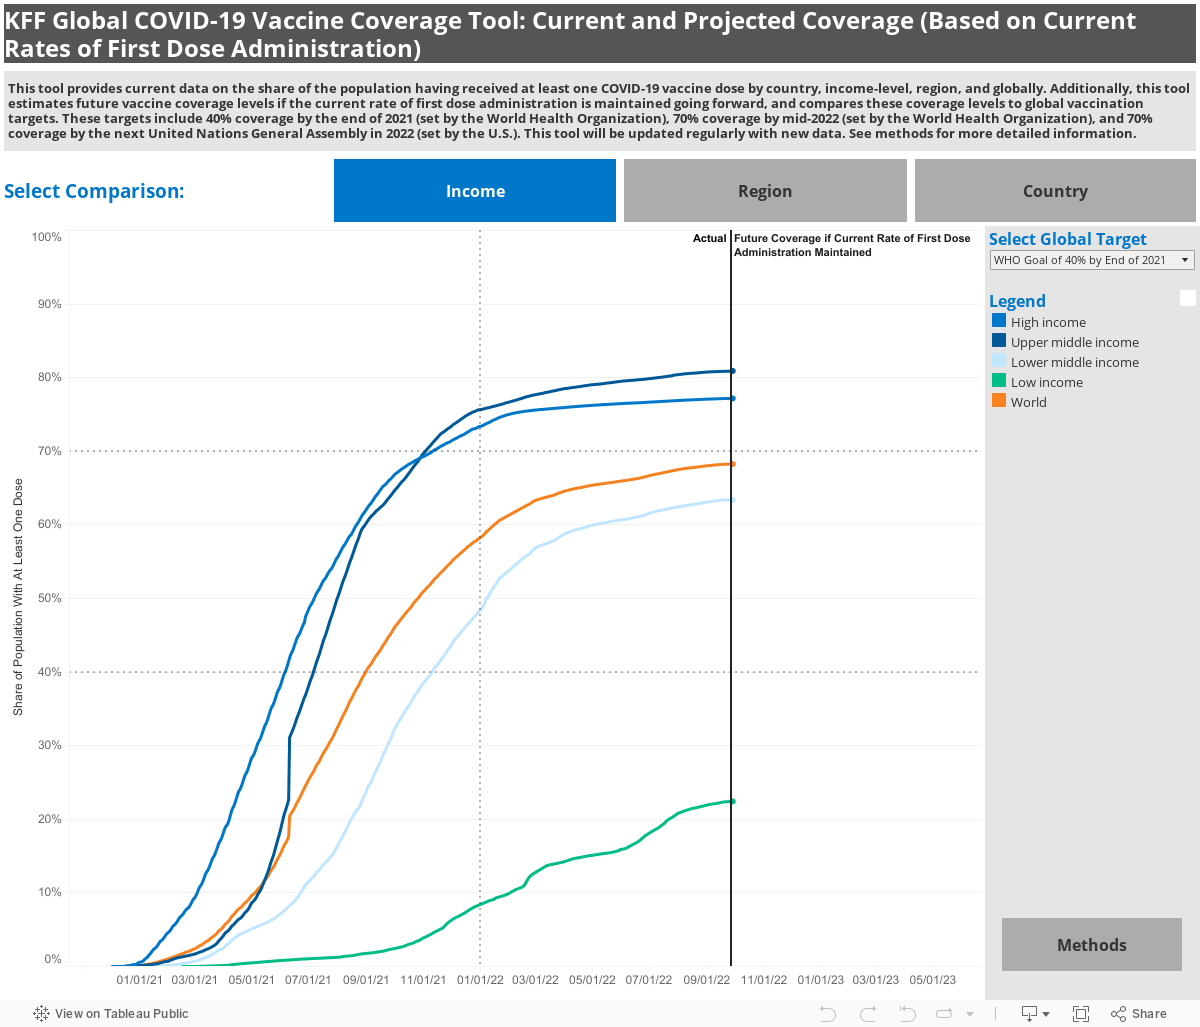 KFF Global COVID-19 Vaccine Coverage Tool: Current and Projected Coverage (Based on Current Rates of First Dose Administration) 